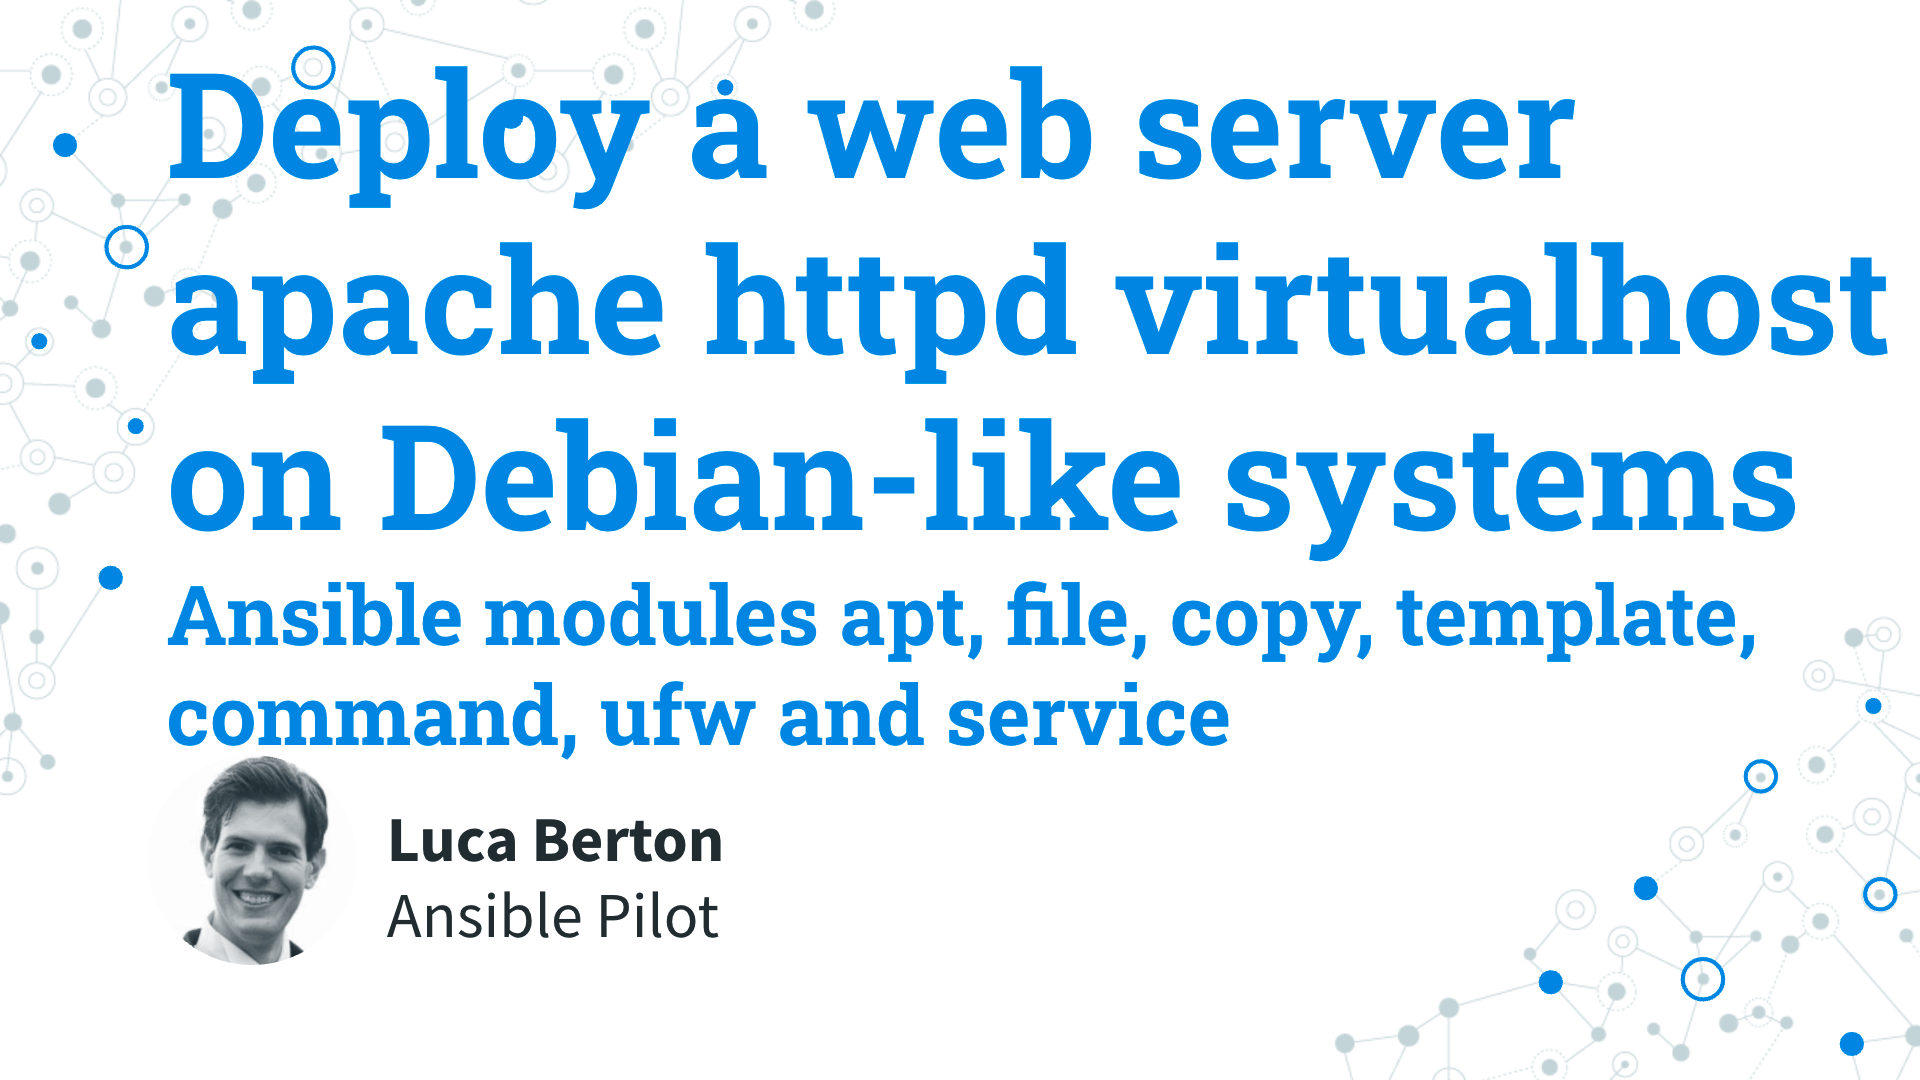 Deploy a web server apache httpd virtual host on Debian-like systems - Ansible modules apt, file, copy, template, command, ufw and service 